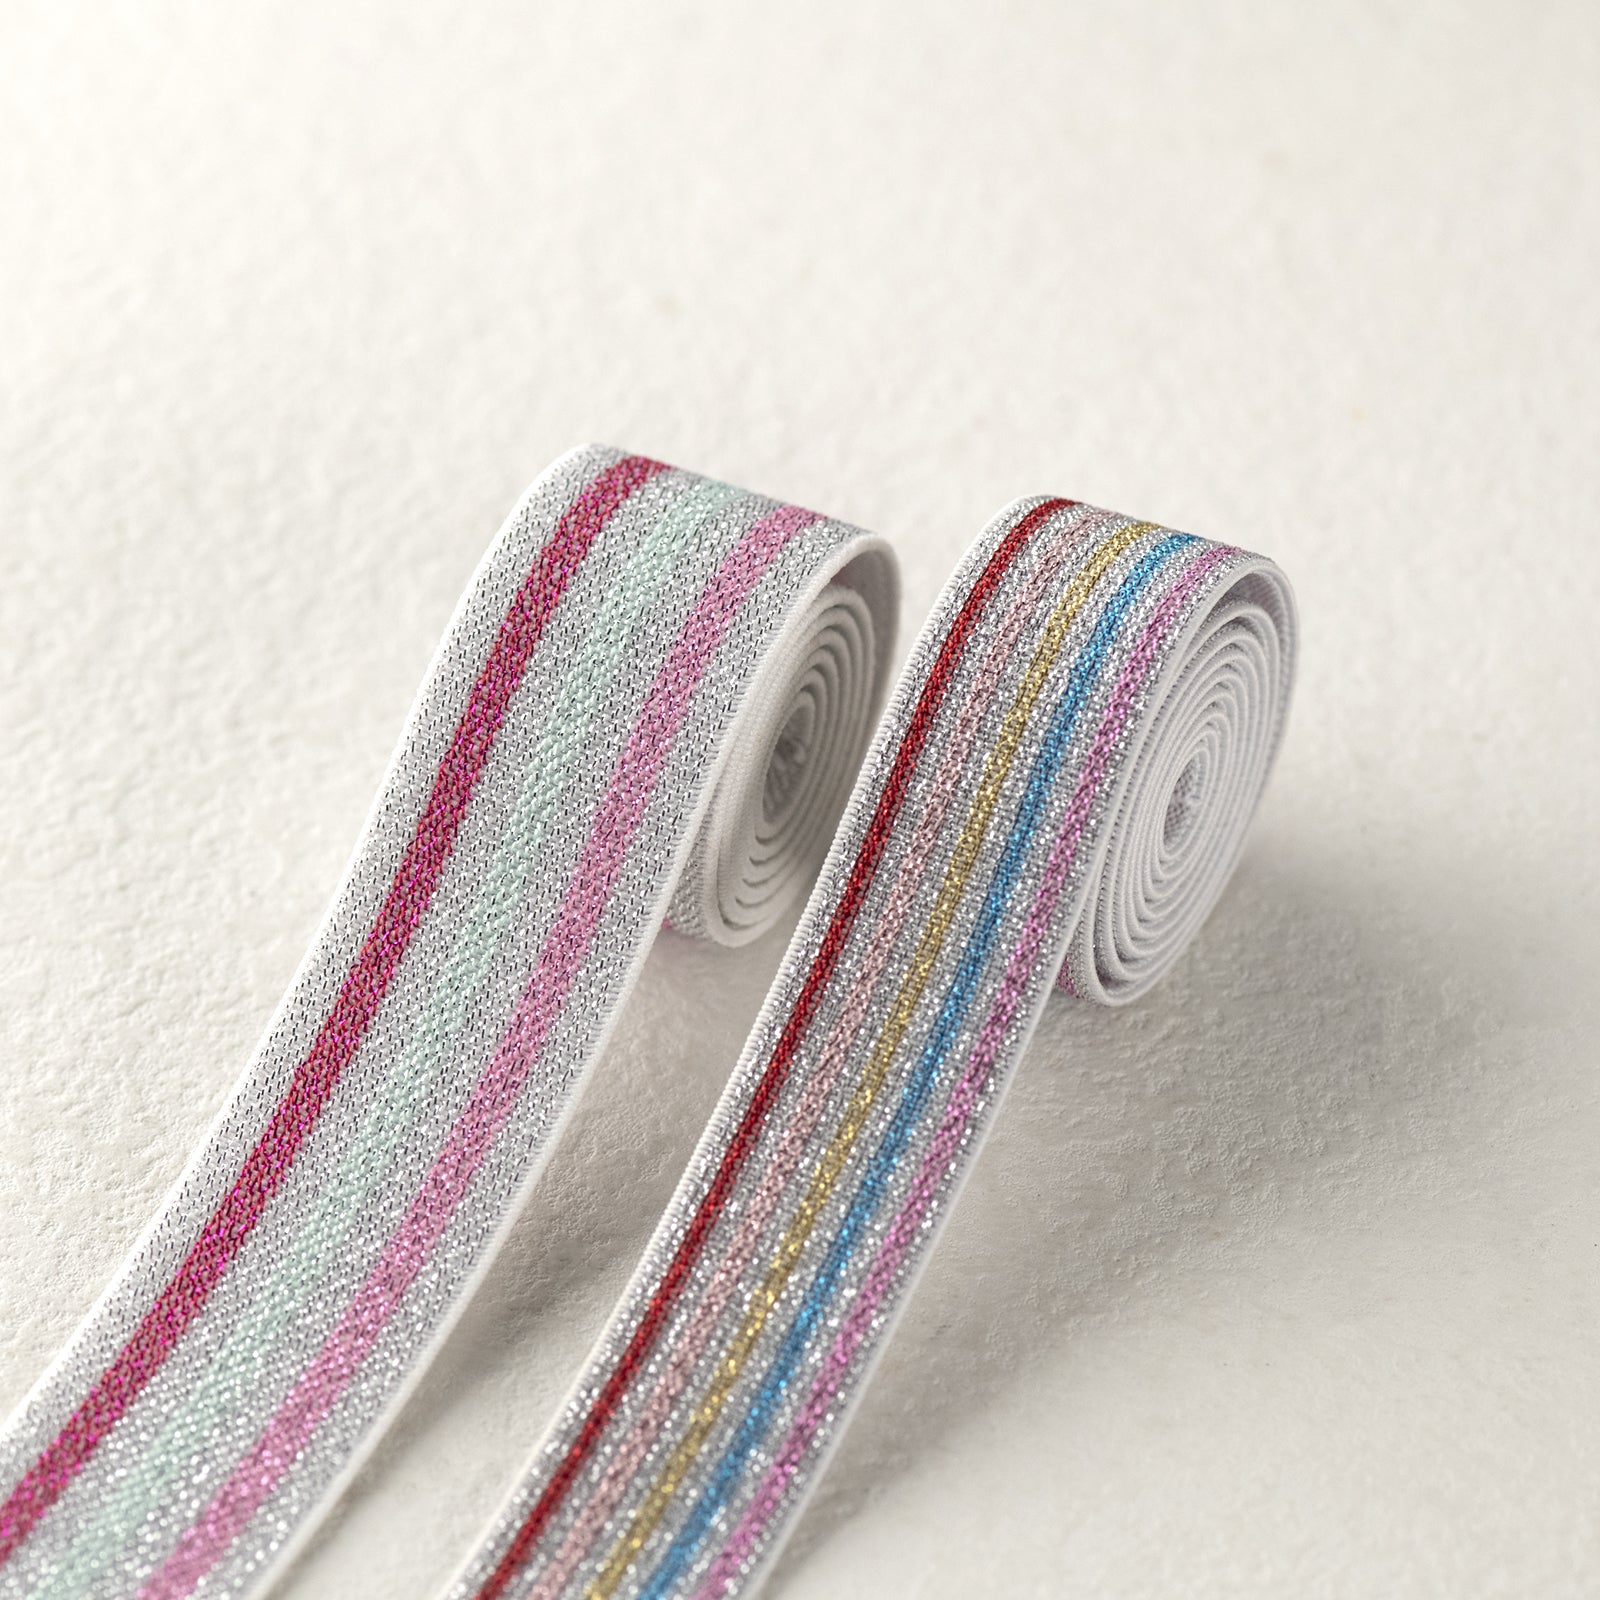 1-1/4 Inch30mm Wide Colored Double-side Twill Elastic Band